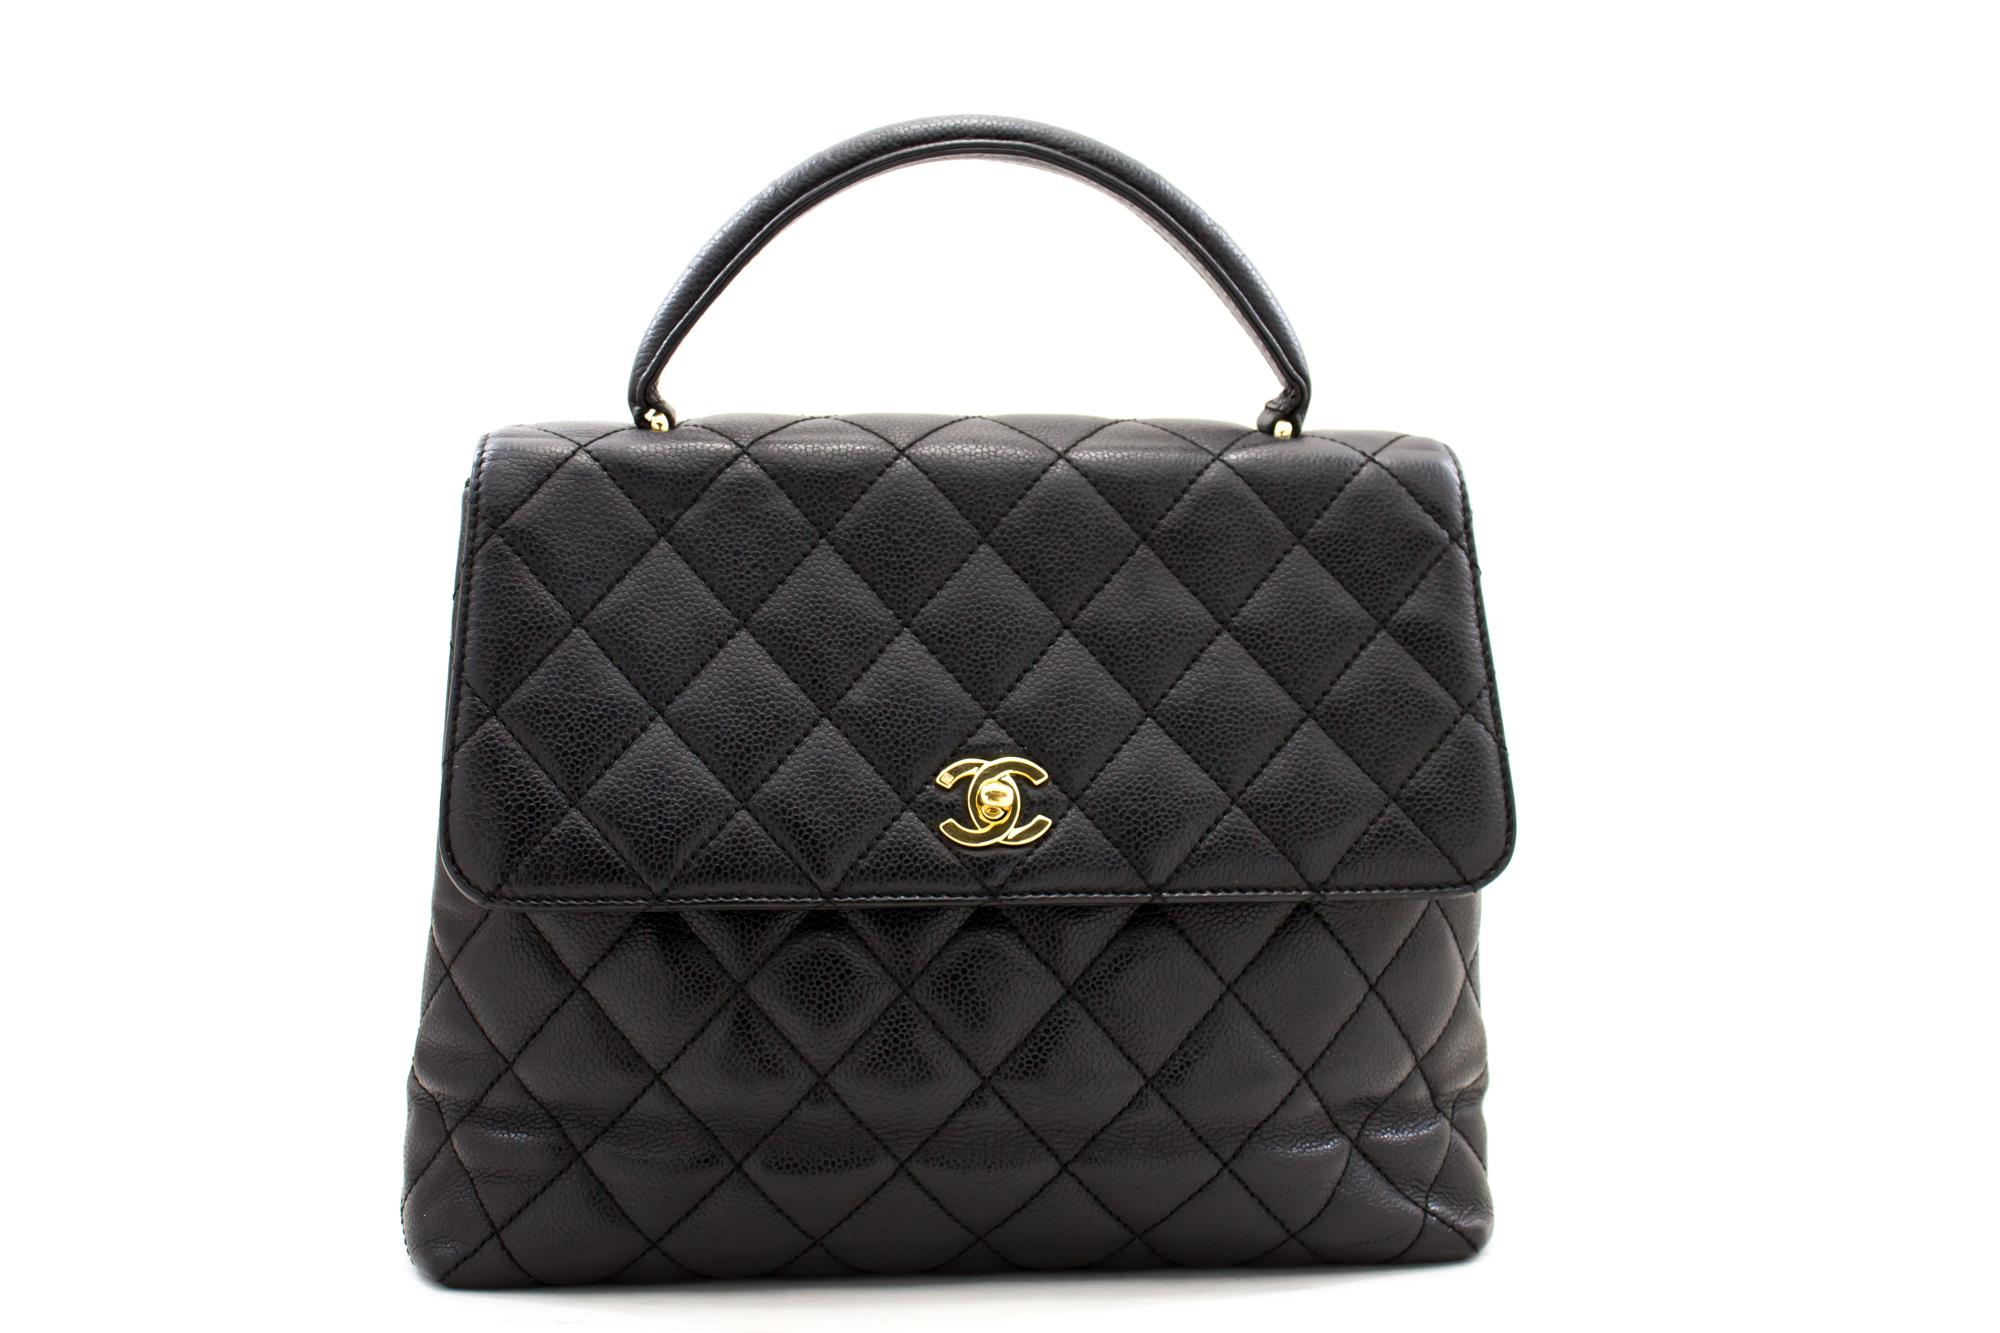 An authentic CHANEL Kelly Caviar Handbag Bag Black Flap Leather Gold Hardware. The color is Black. The outside material is Leather. The pattern is Solid. This item is Contemporary. The year of manufacture would be 2 0 0 2 .
Conditions &